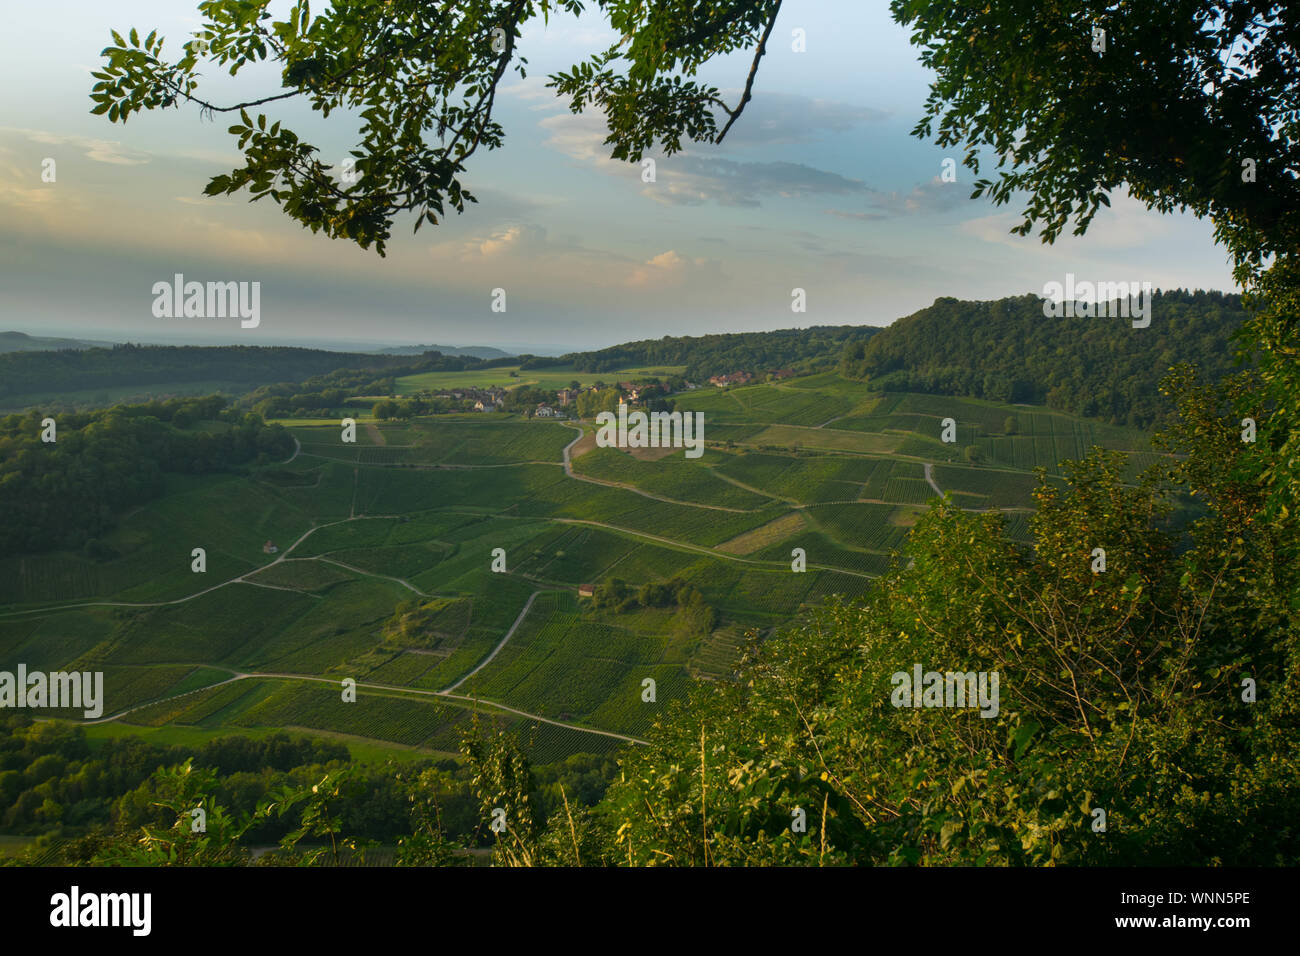 Vineyards near Chateau Chalon in the Franche Comté area in France Stock Photo